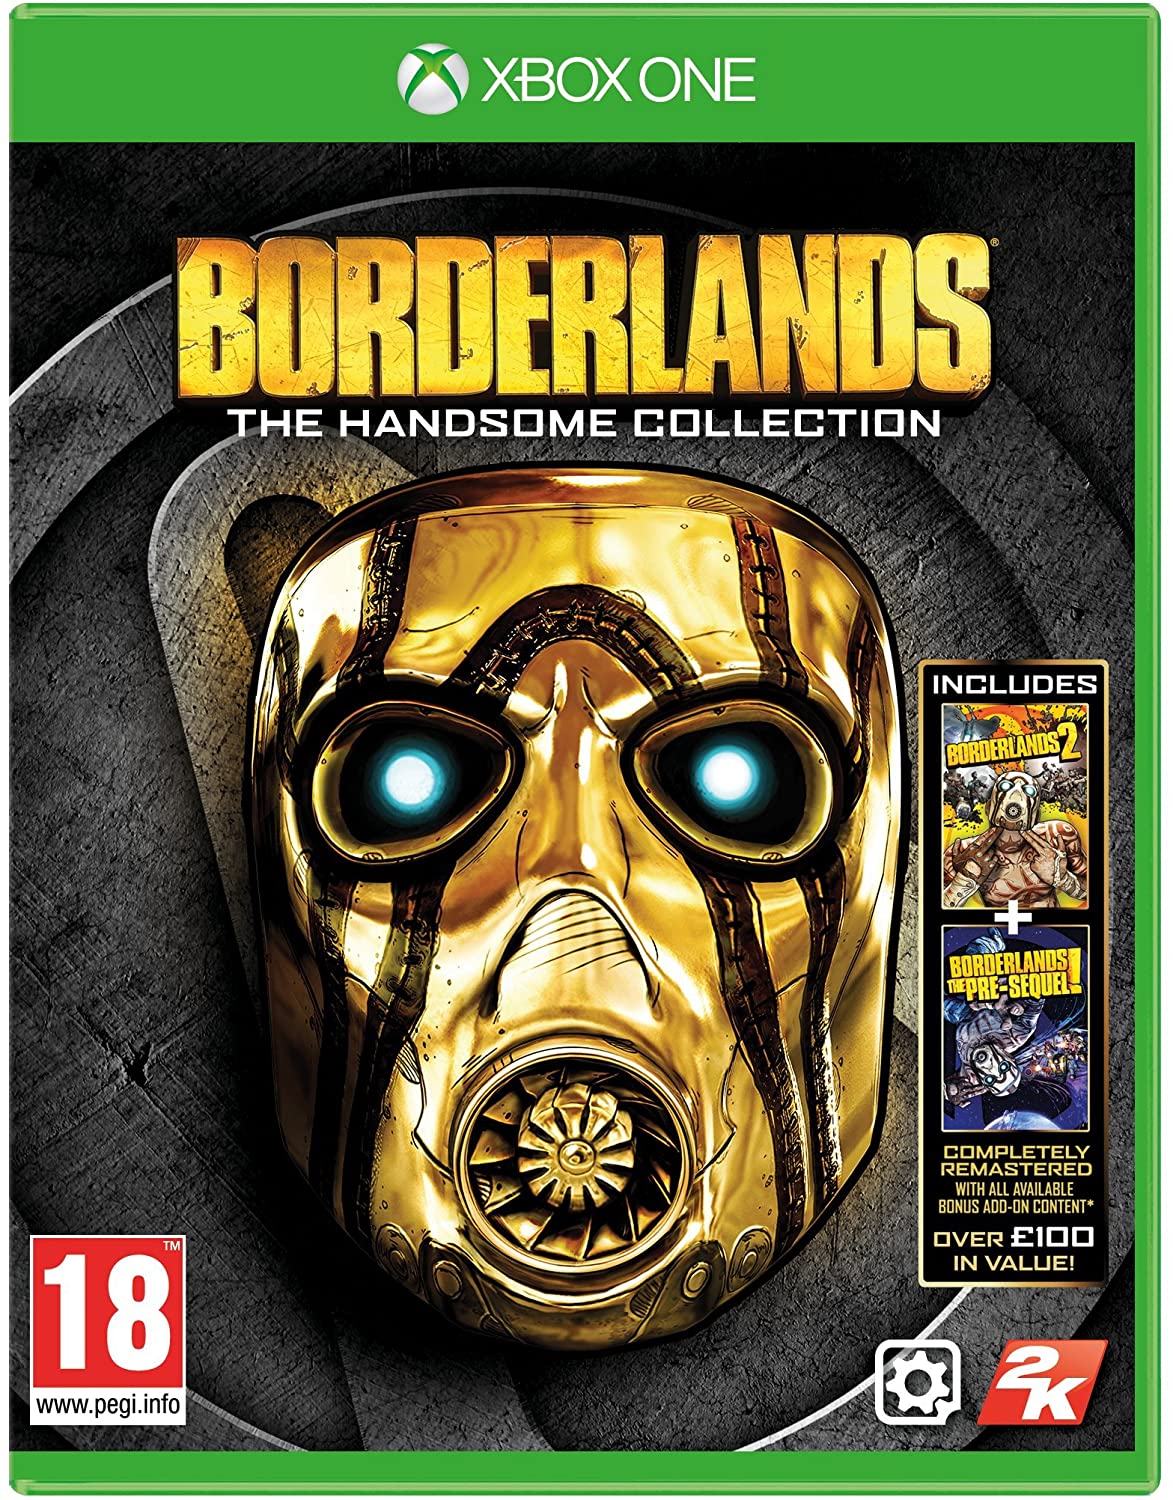 Xbox One Borderlands The Handsome Collection EU